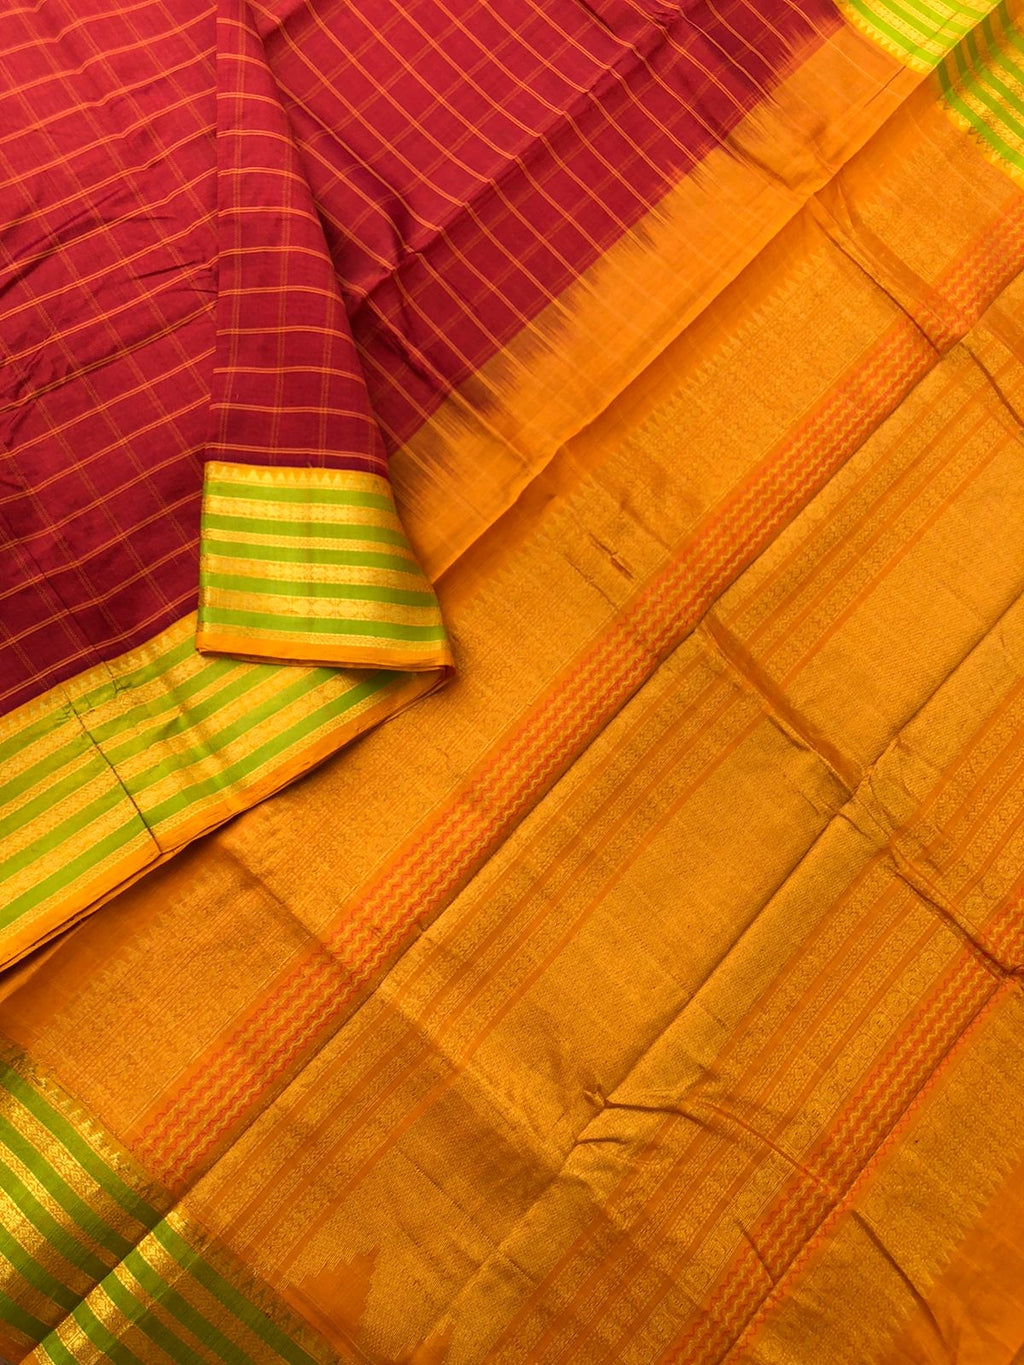 Divyam - Korvai Silk Cotton with Pure Silk Woven Borders - rusty brick red and mustard